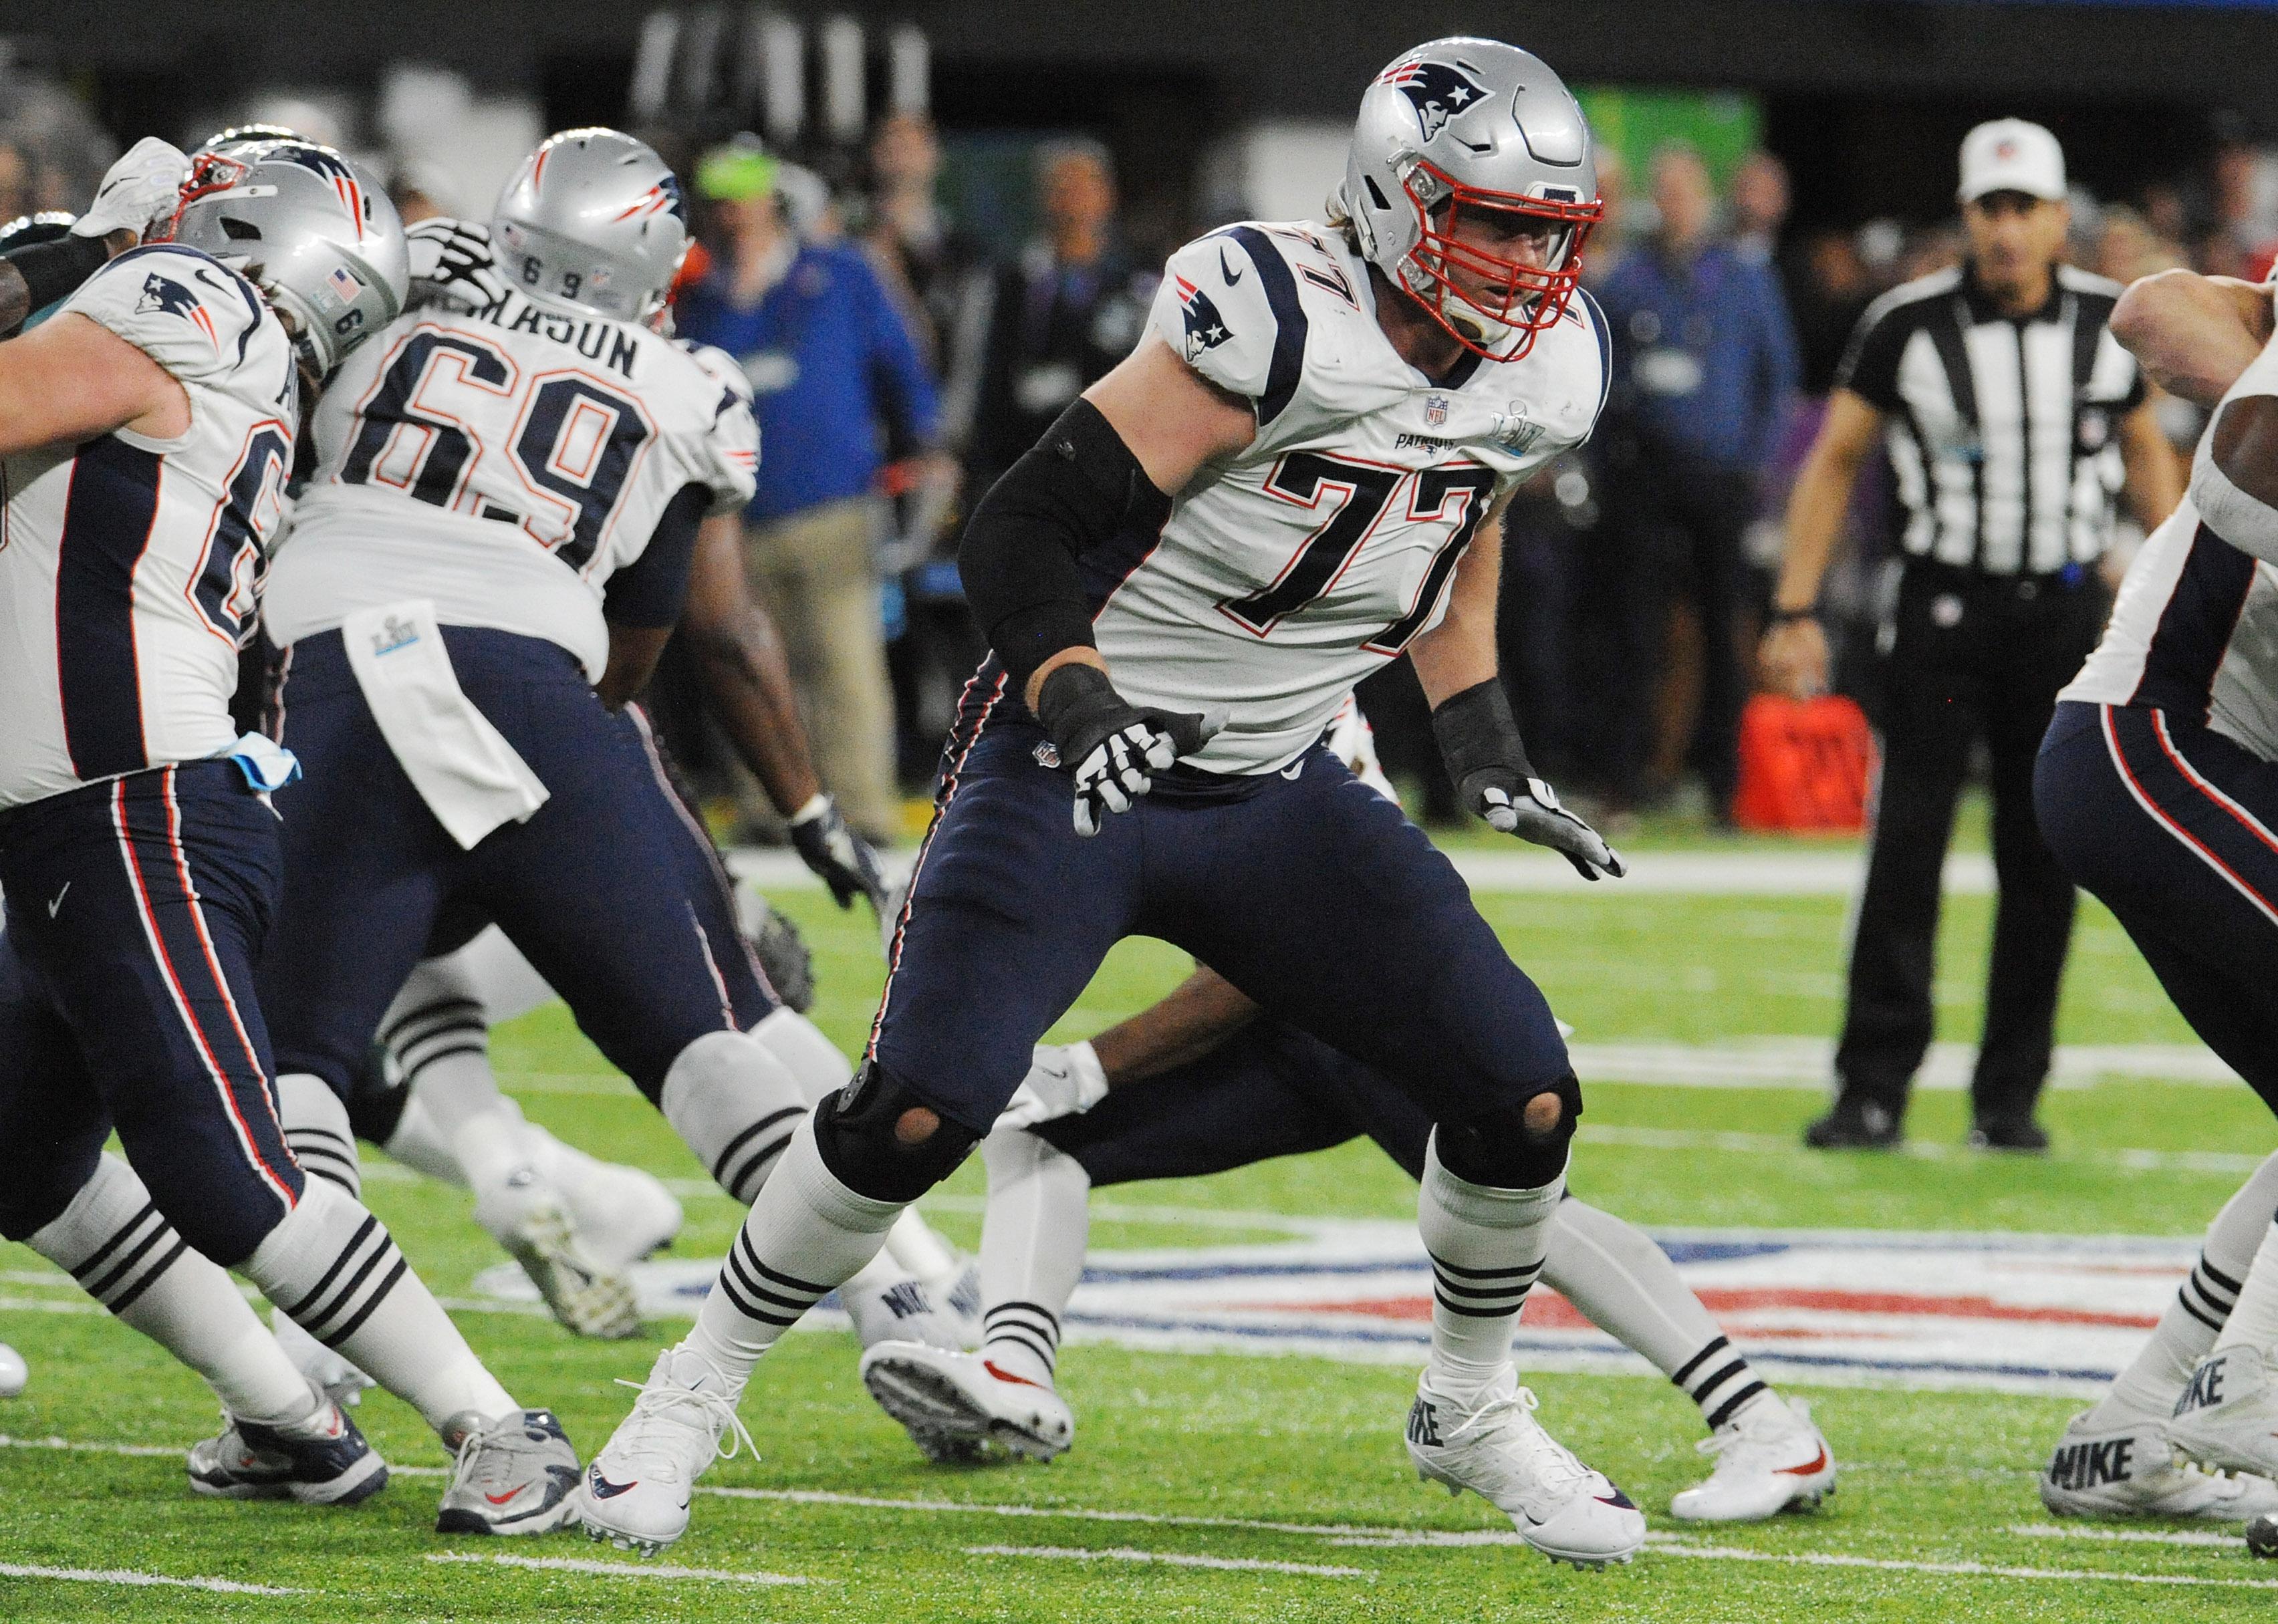 Nate Solder of the New England Patriots in action during Super Bowl LII.